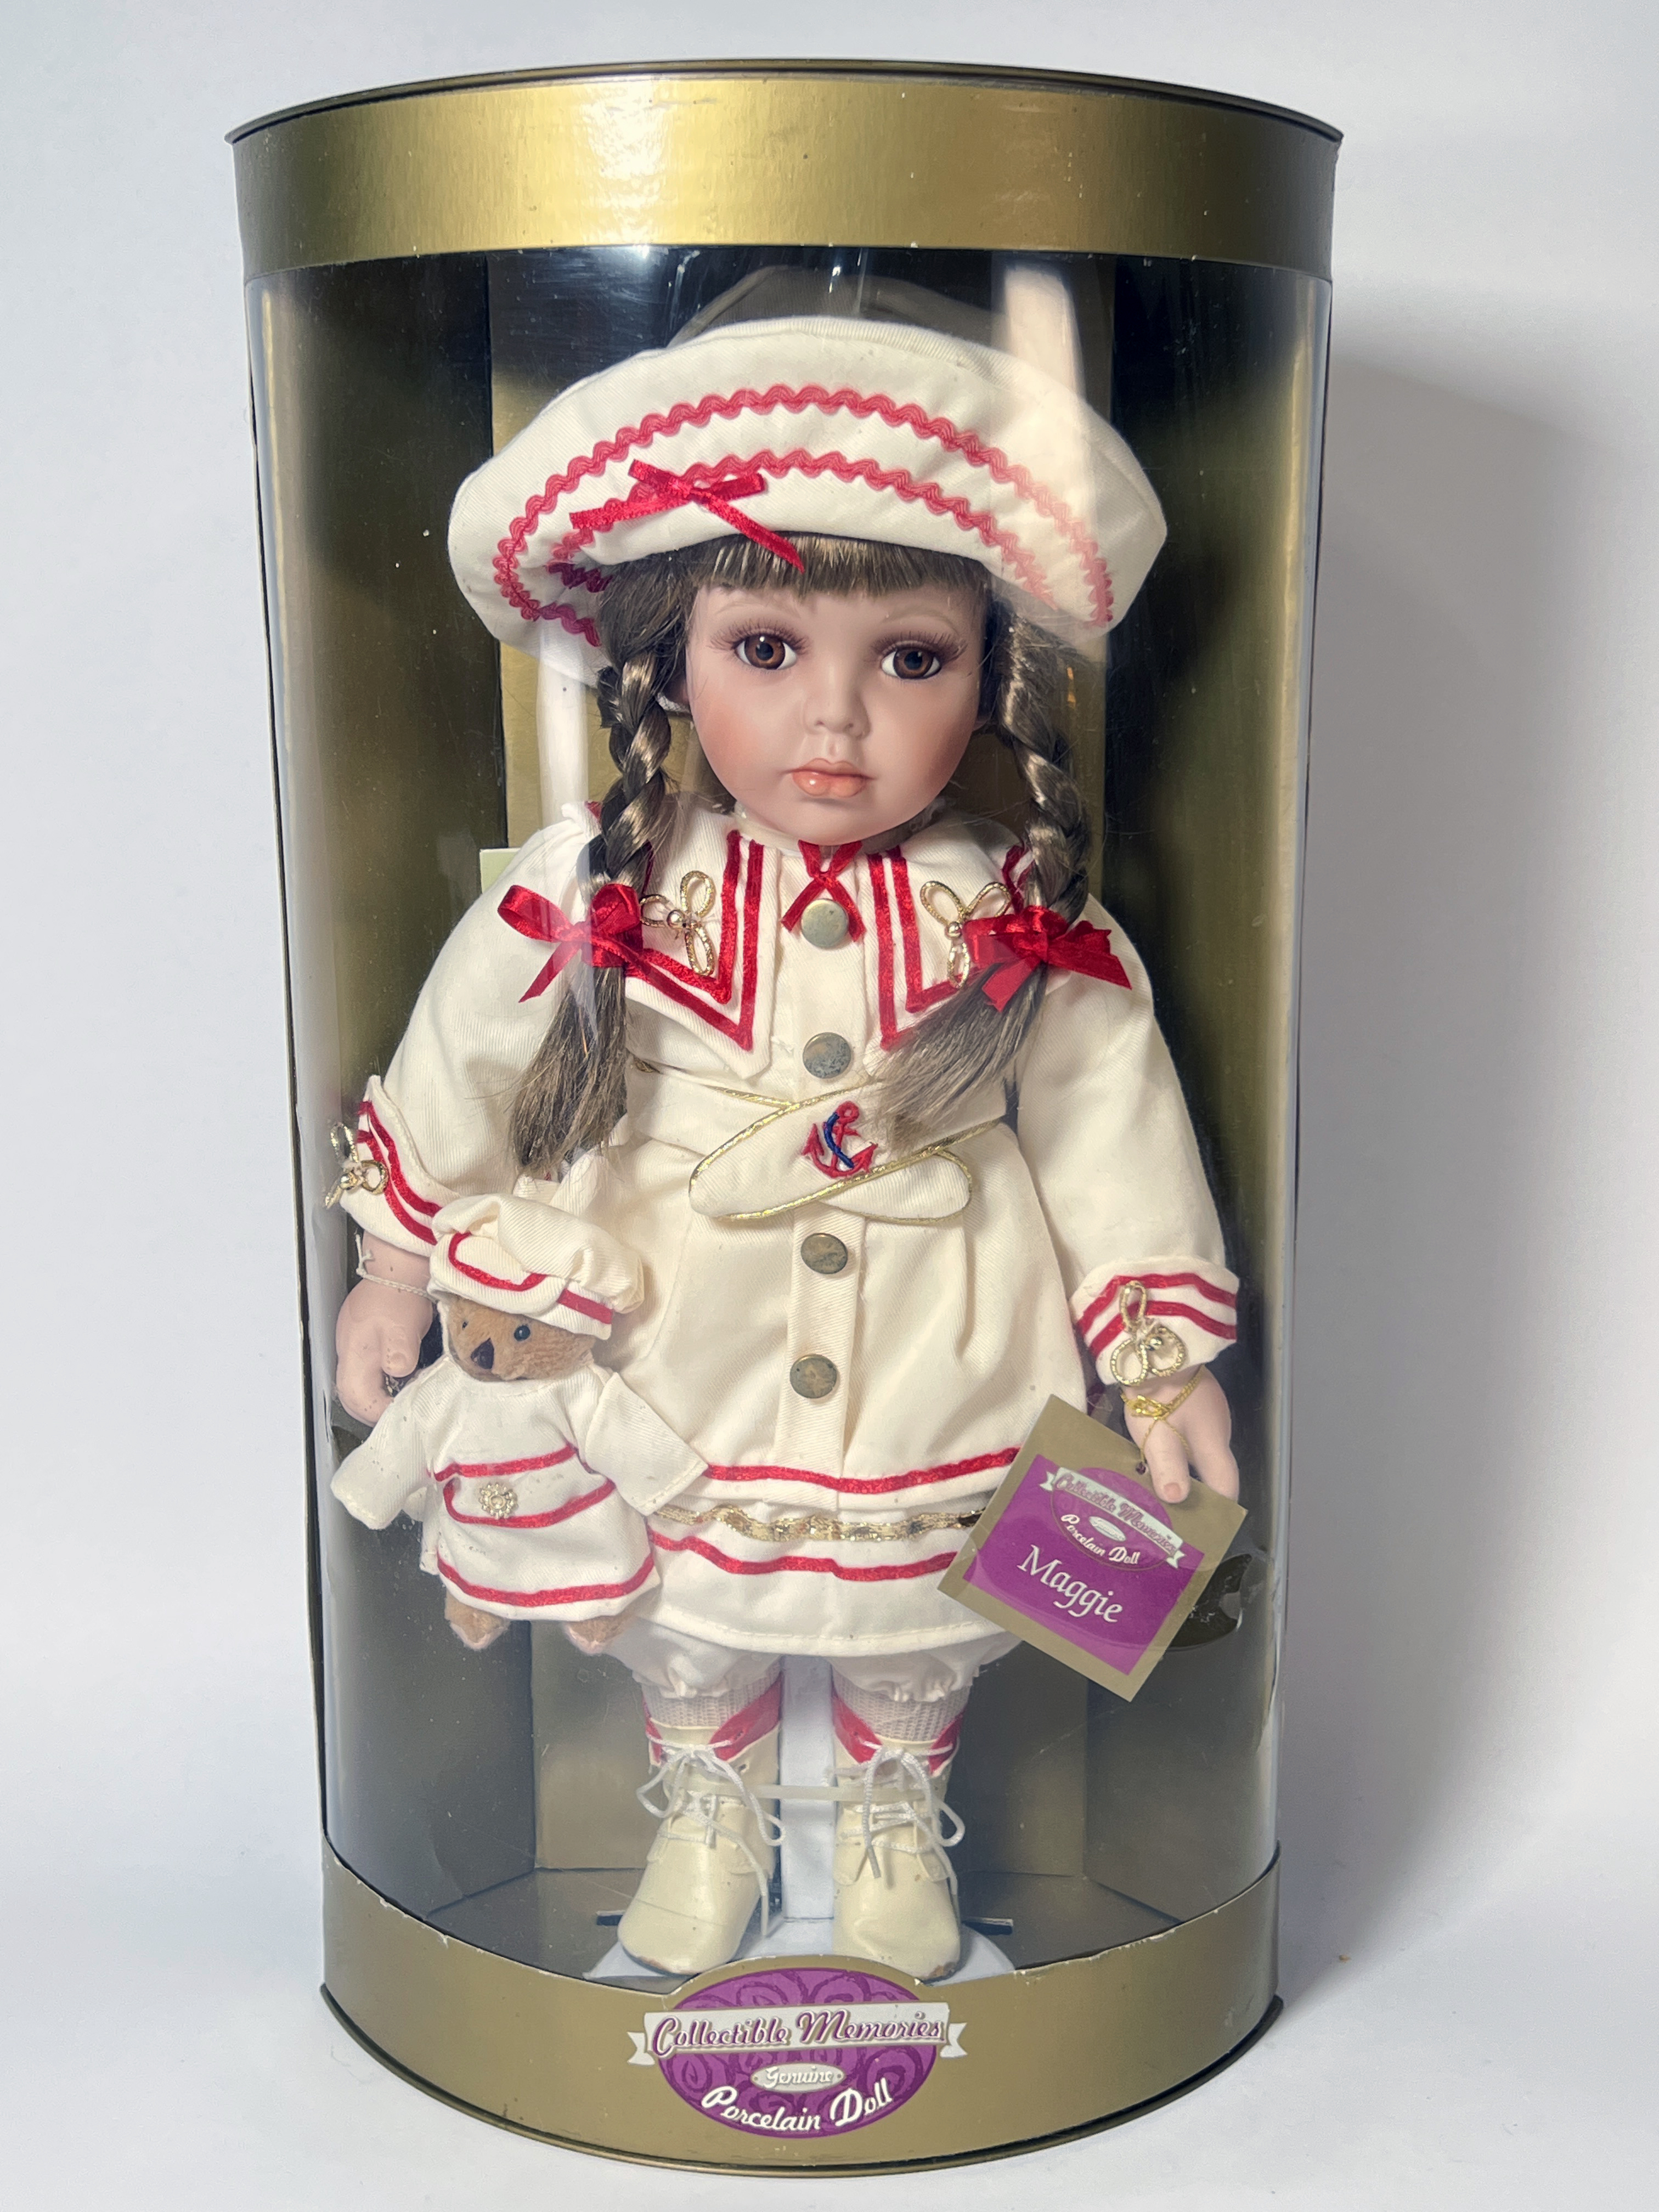 Collectible Memories Porcelain Doll Maggie In Box image 1